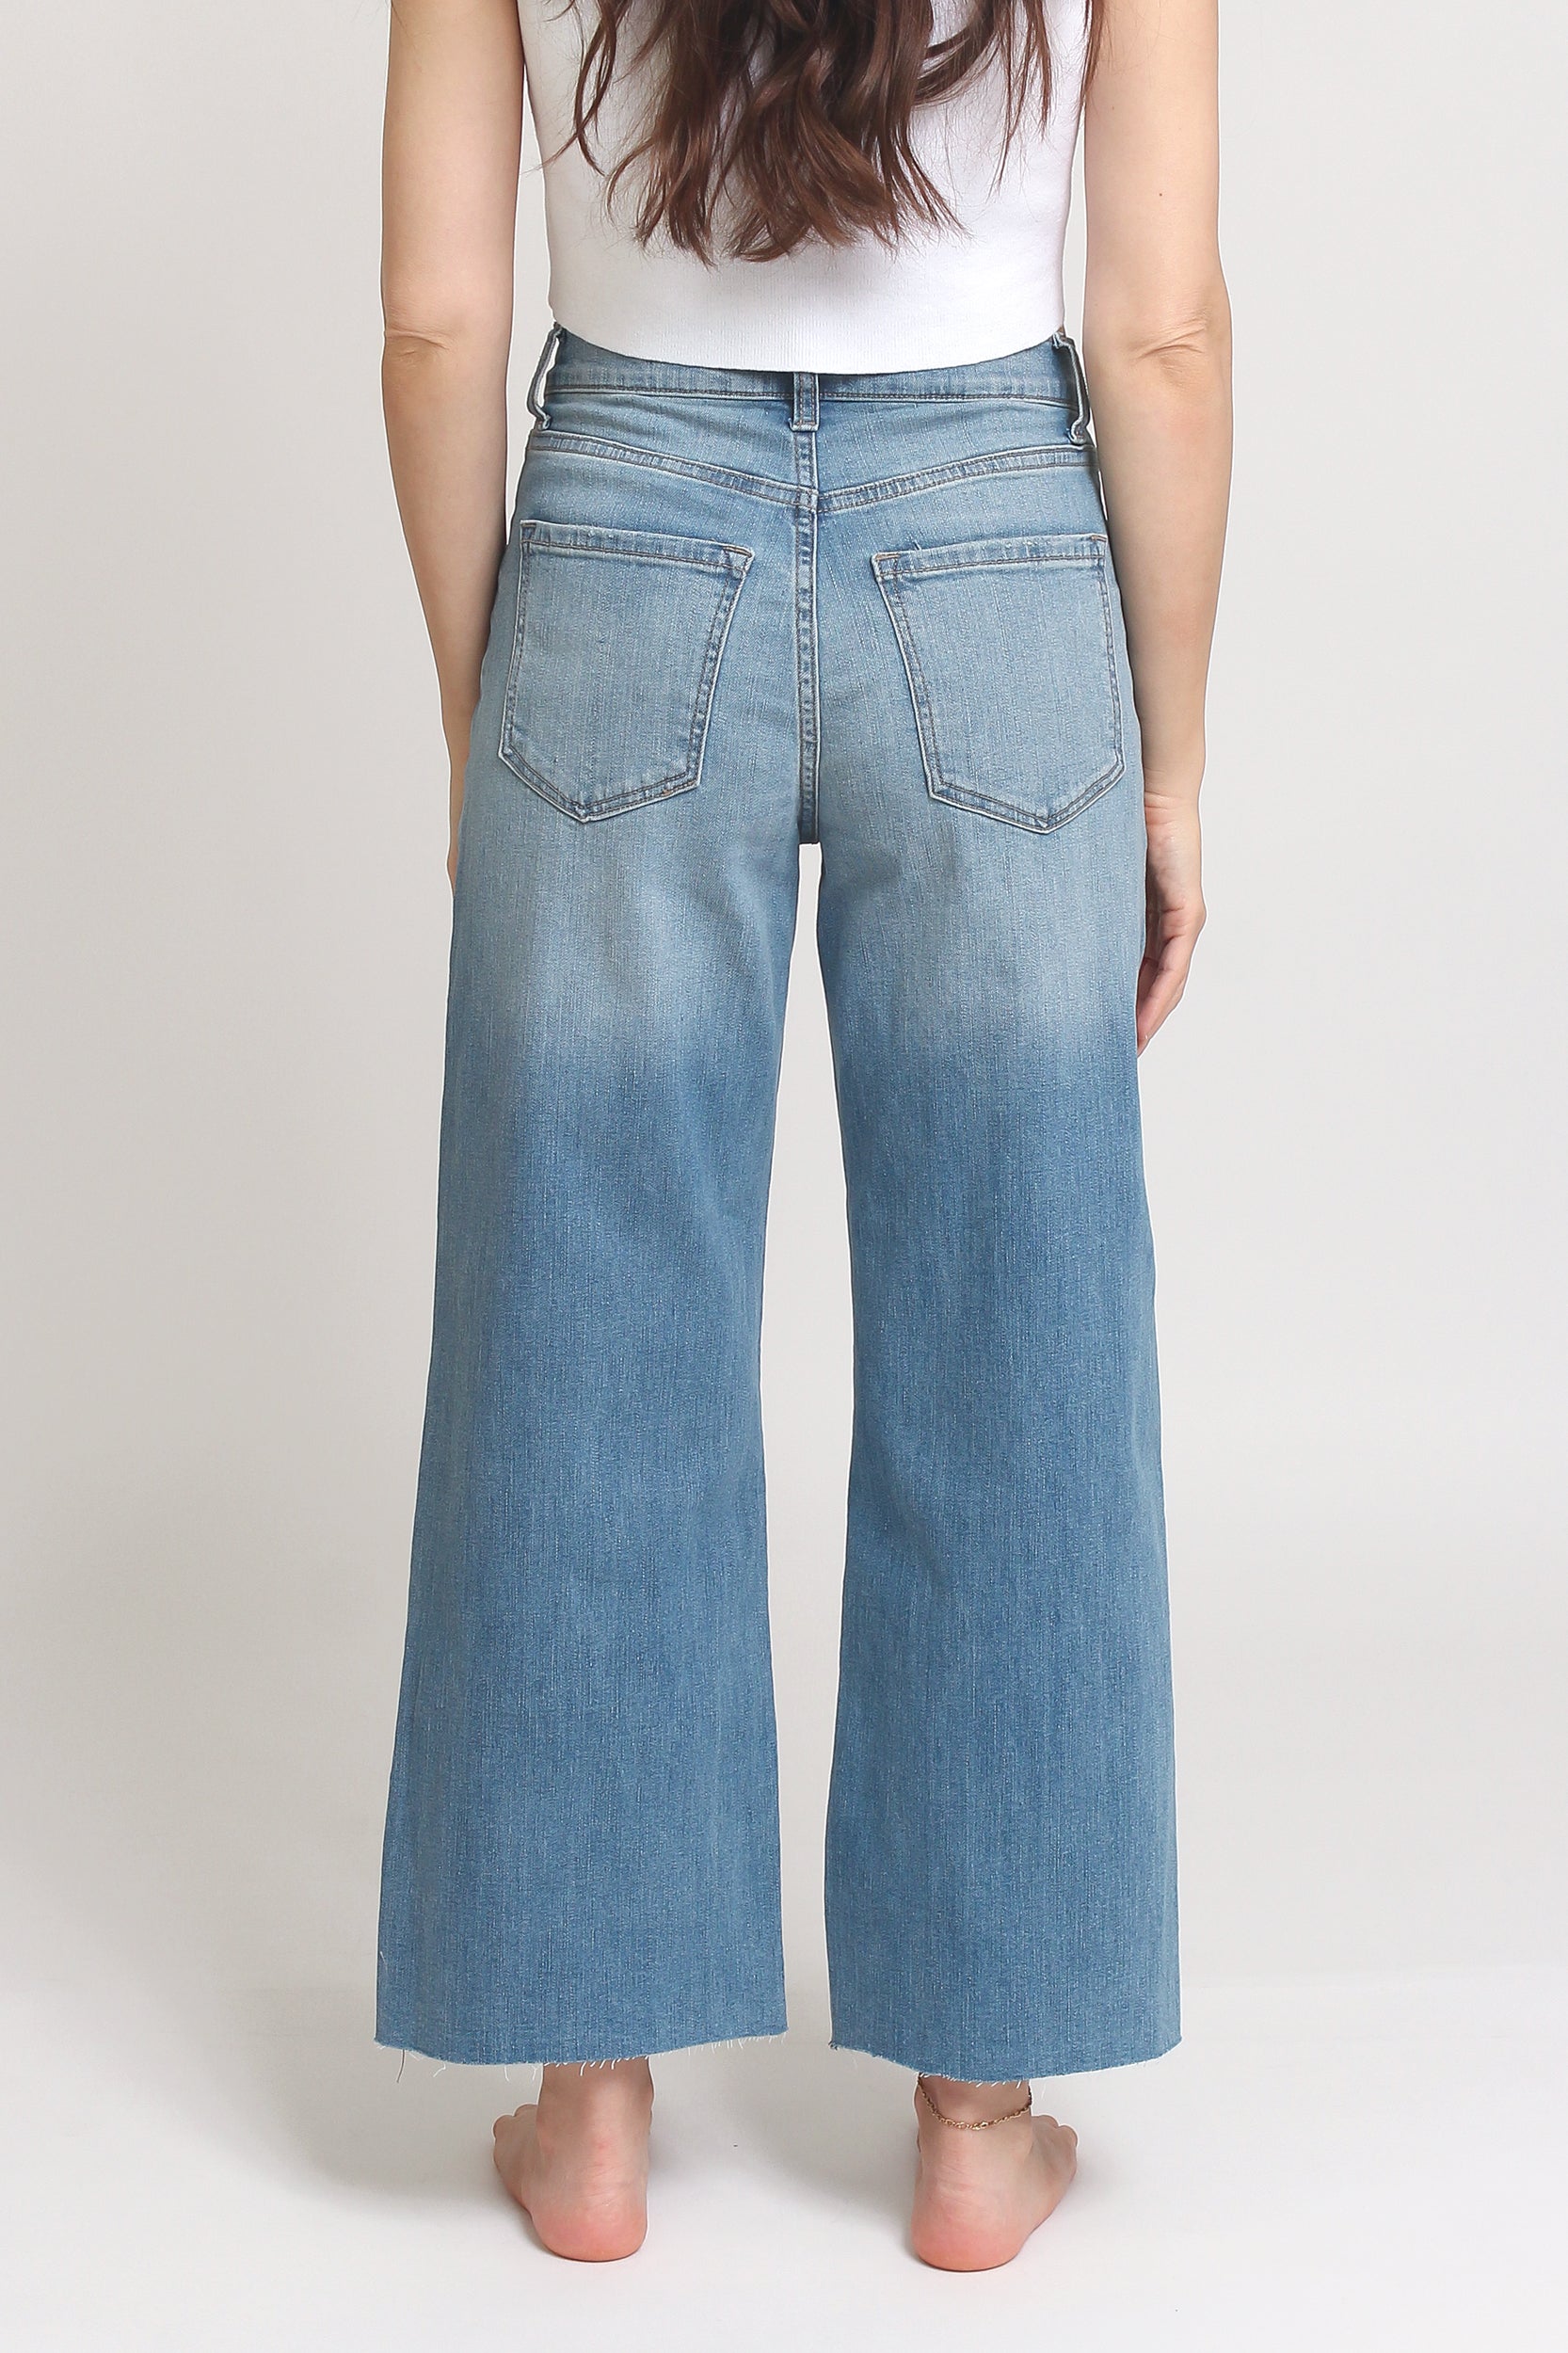 High waist, cut off cropped jeans, in Med/Light. Image 10